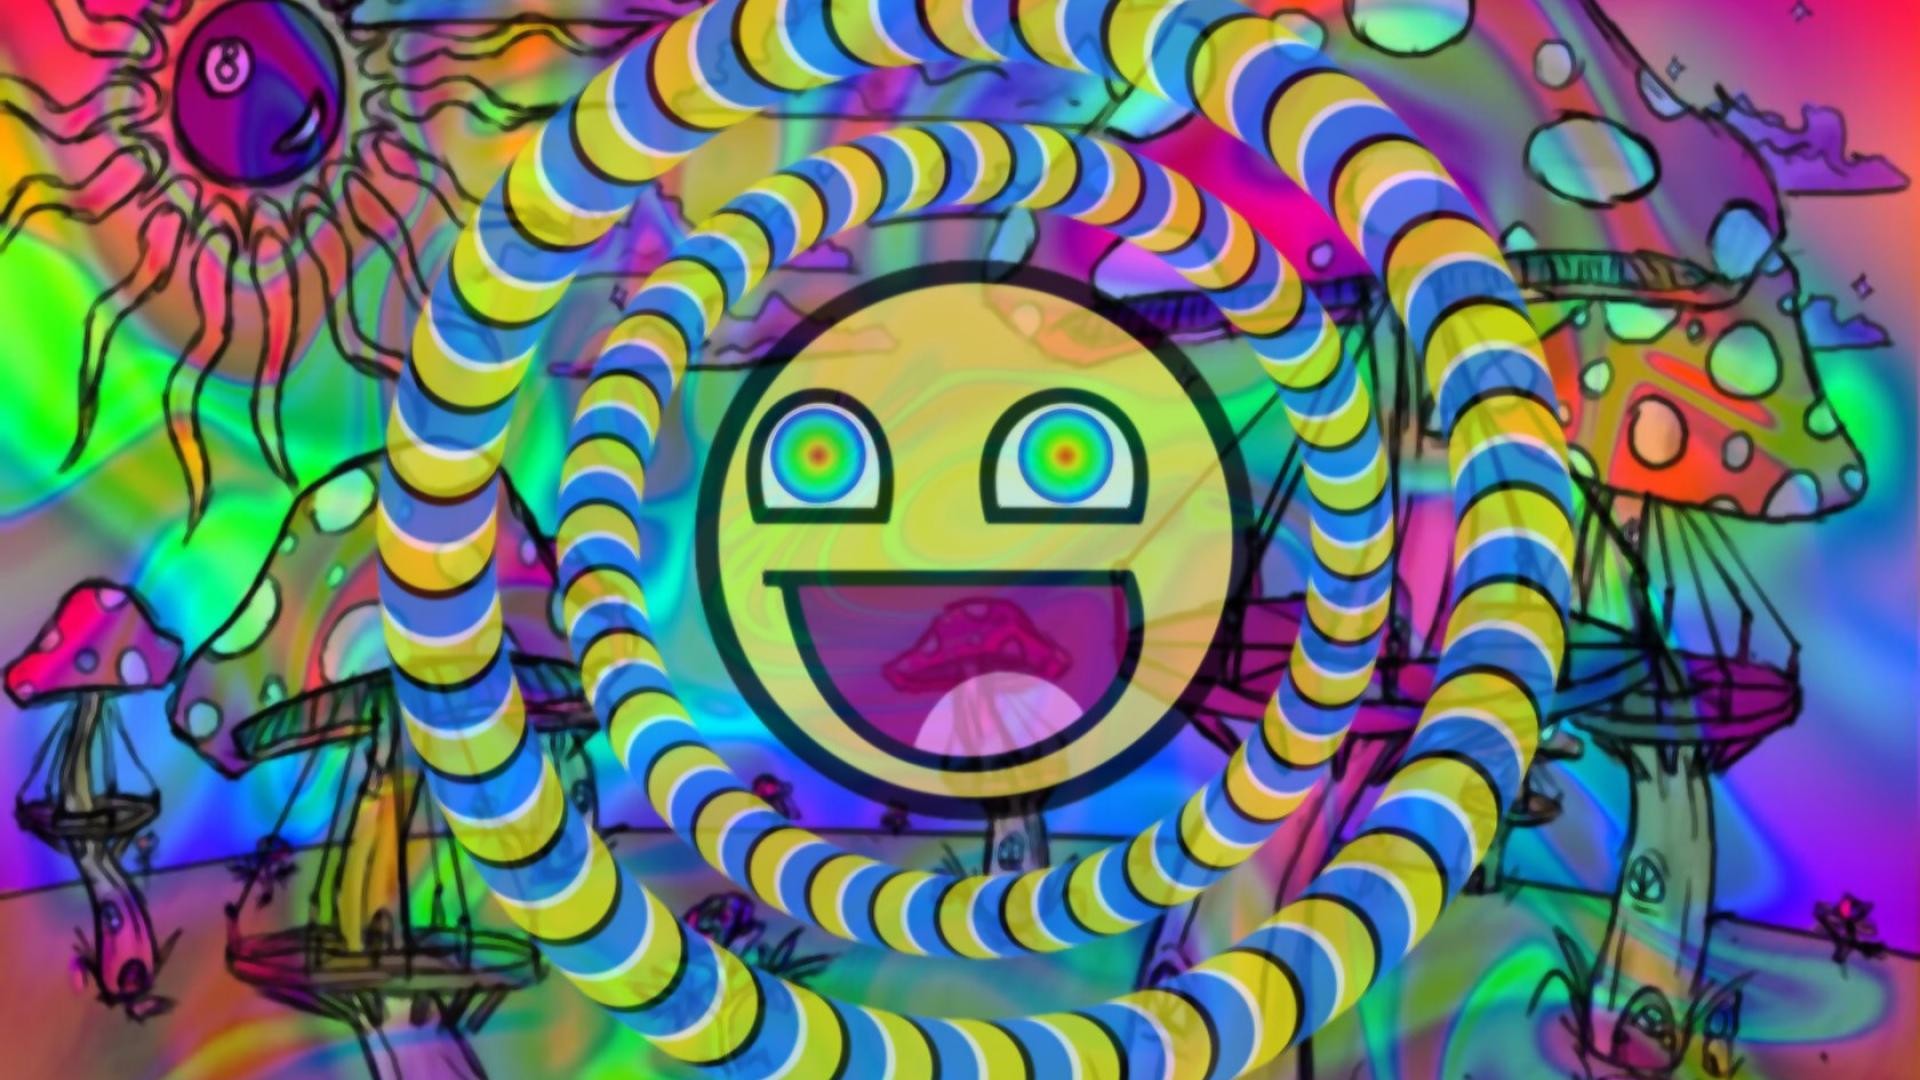 3400 Drug Trip Stock Photos Pictures  RoyaltyFree Images  iStock   Lsd Acid trip Psychedelic